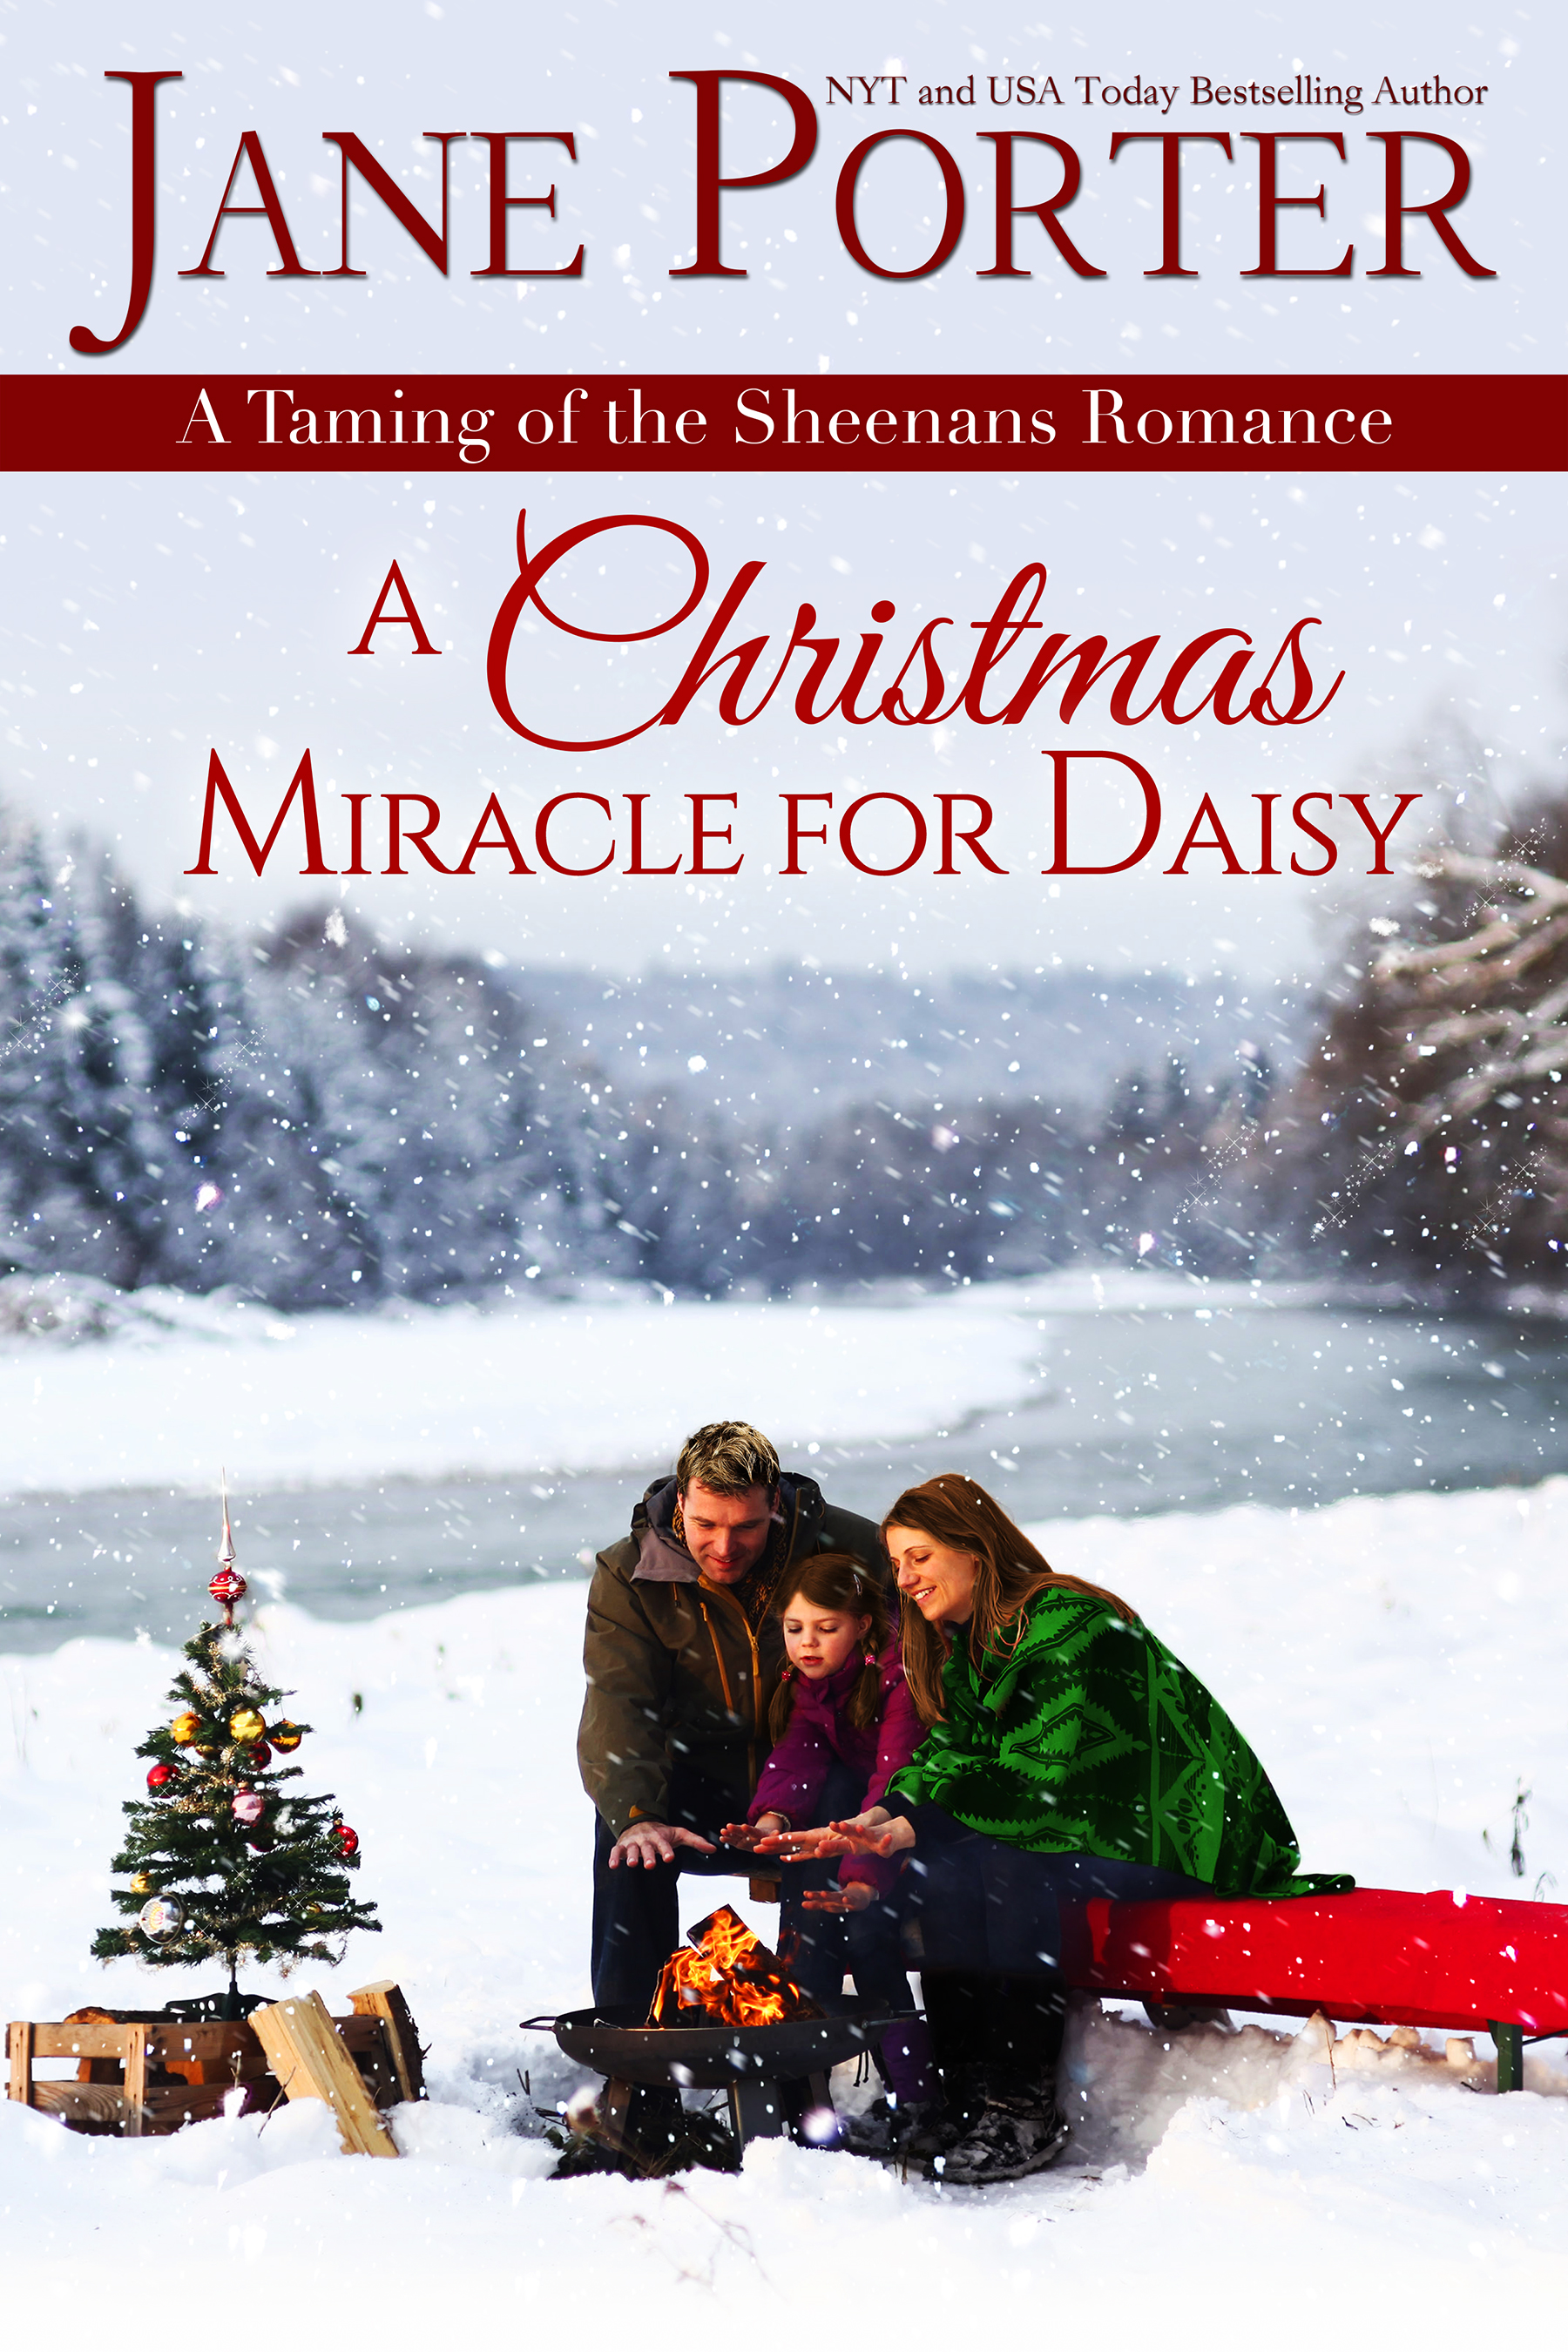 A Christmas Miracle for Daisy on DVD!